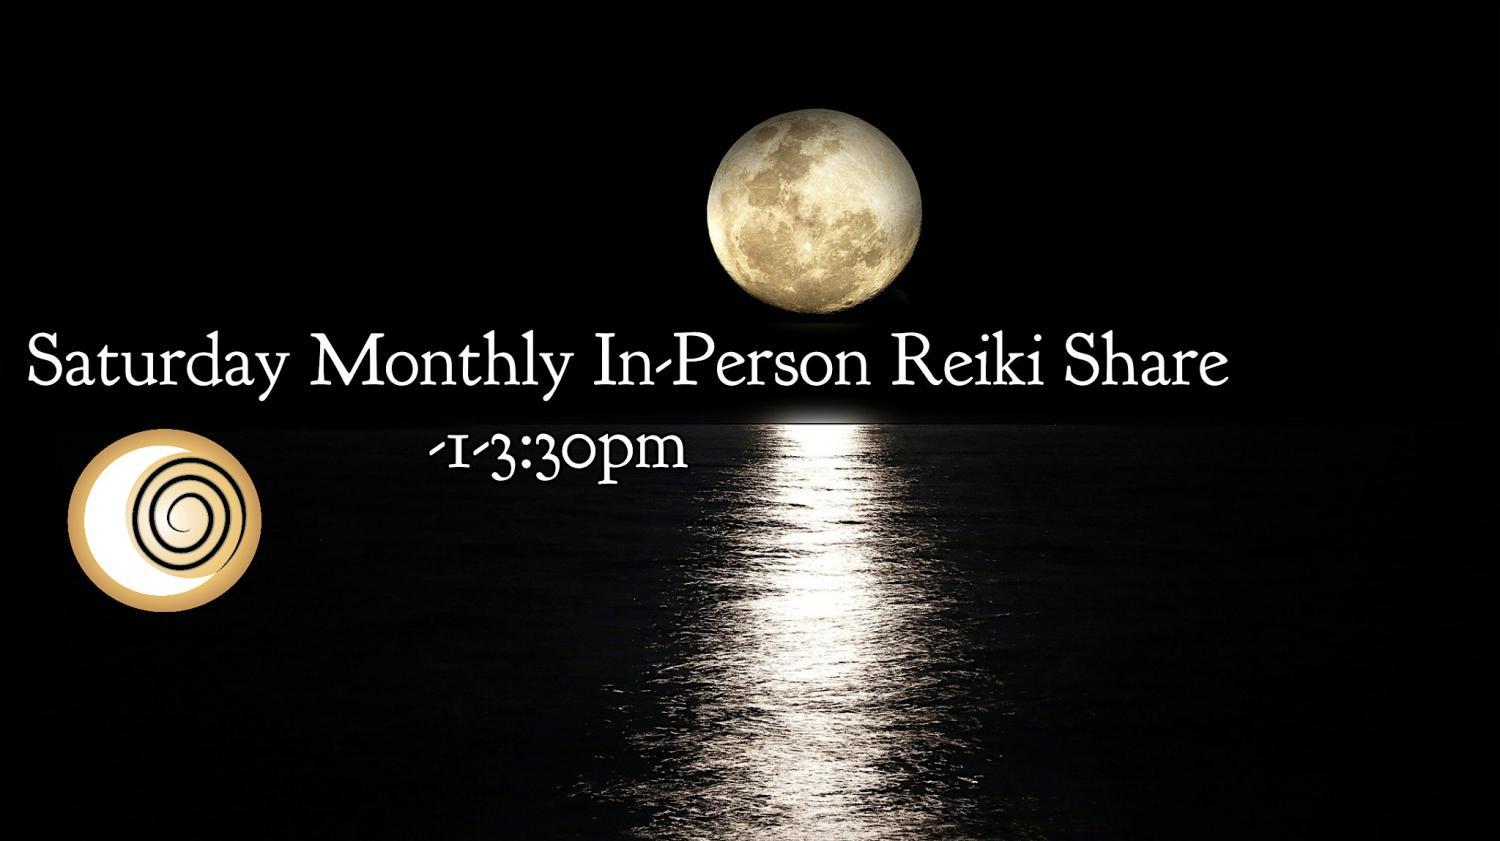 October Full Moon In Person Reiki Share
Sat Oct 8, 1:00 PM - Sat Oct 8, 3:30 PM